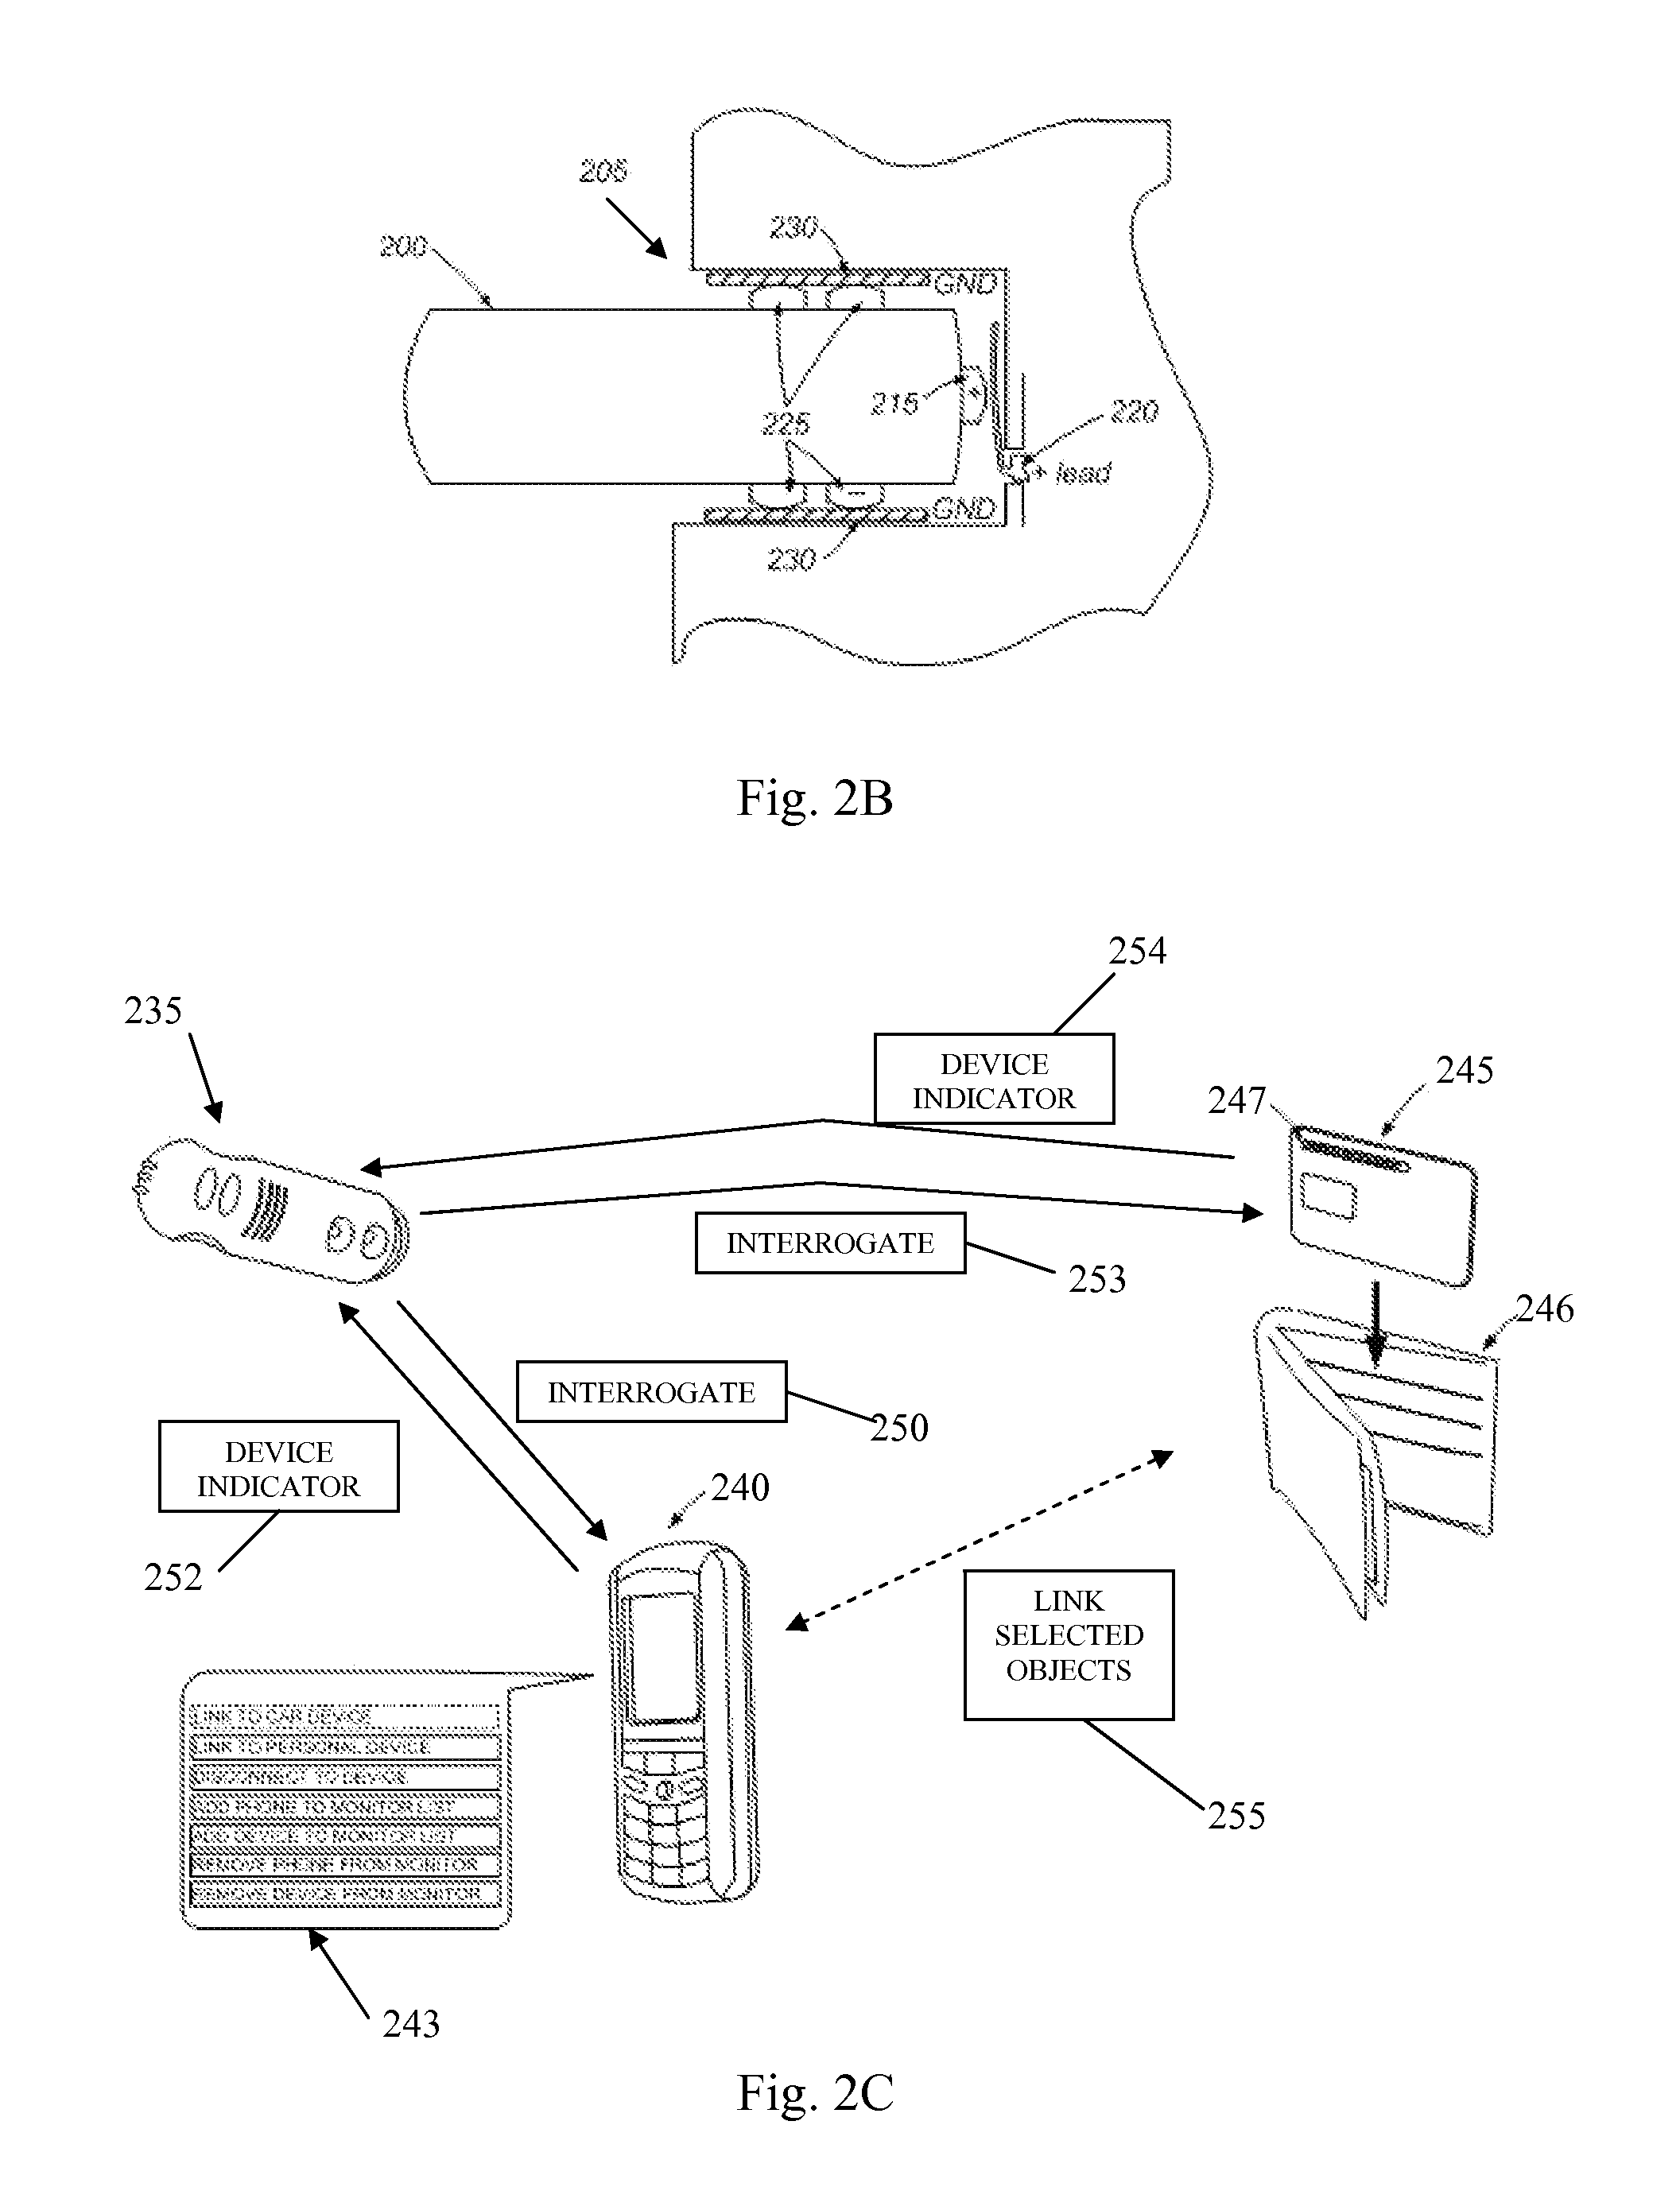 System, method and device to interrogate for the presence of objects